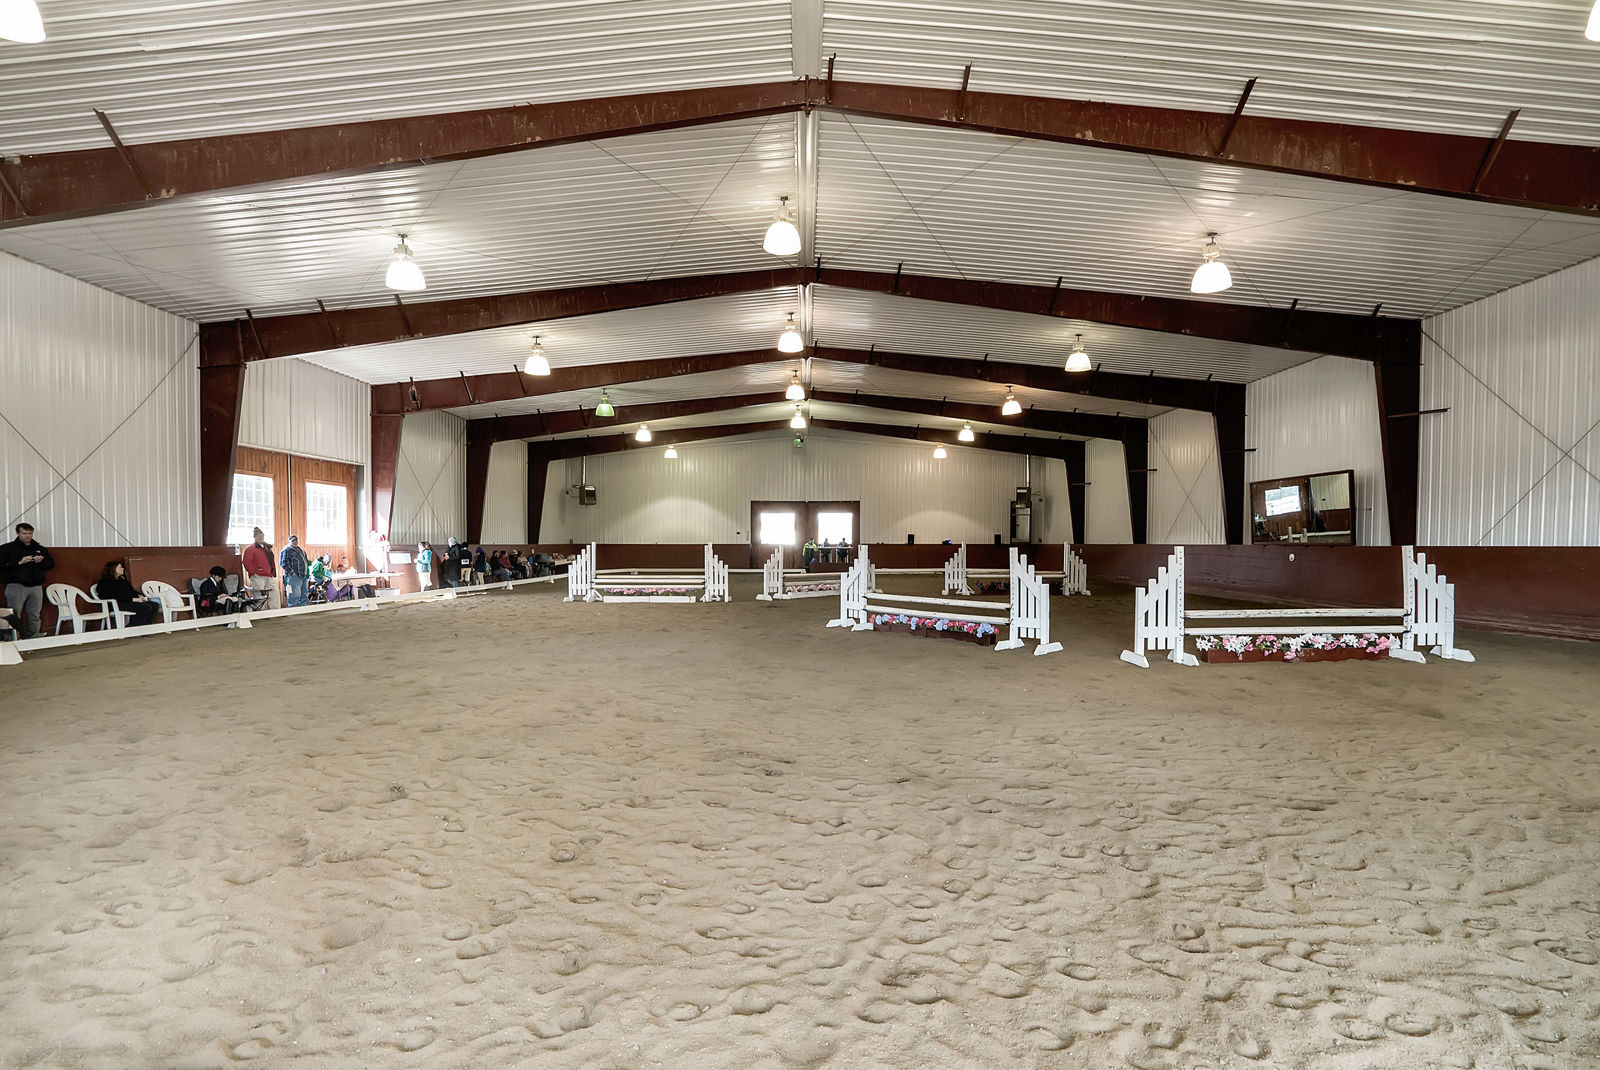 The property also includes an 11,200-square-foot indoor riding arena, two show arenas and stables and offers boarding and training. It also hosts regular events, including seven Virginia Horse Show Association Hunter/Jumper shows booked for 2017, according to the listing. (Courtesy Auction Markets LLC)